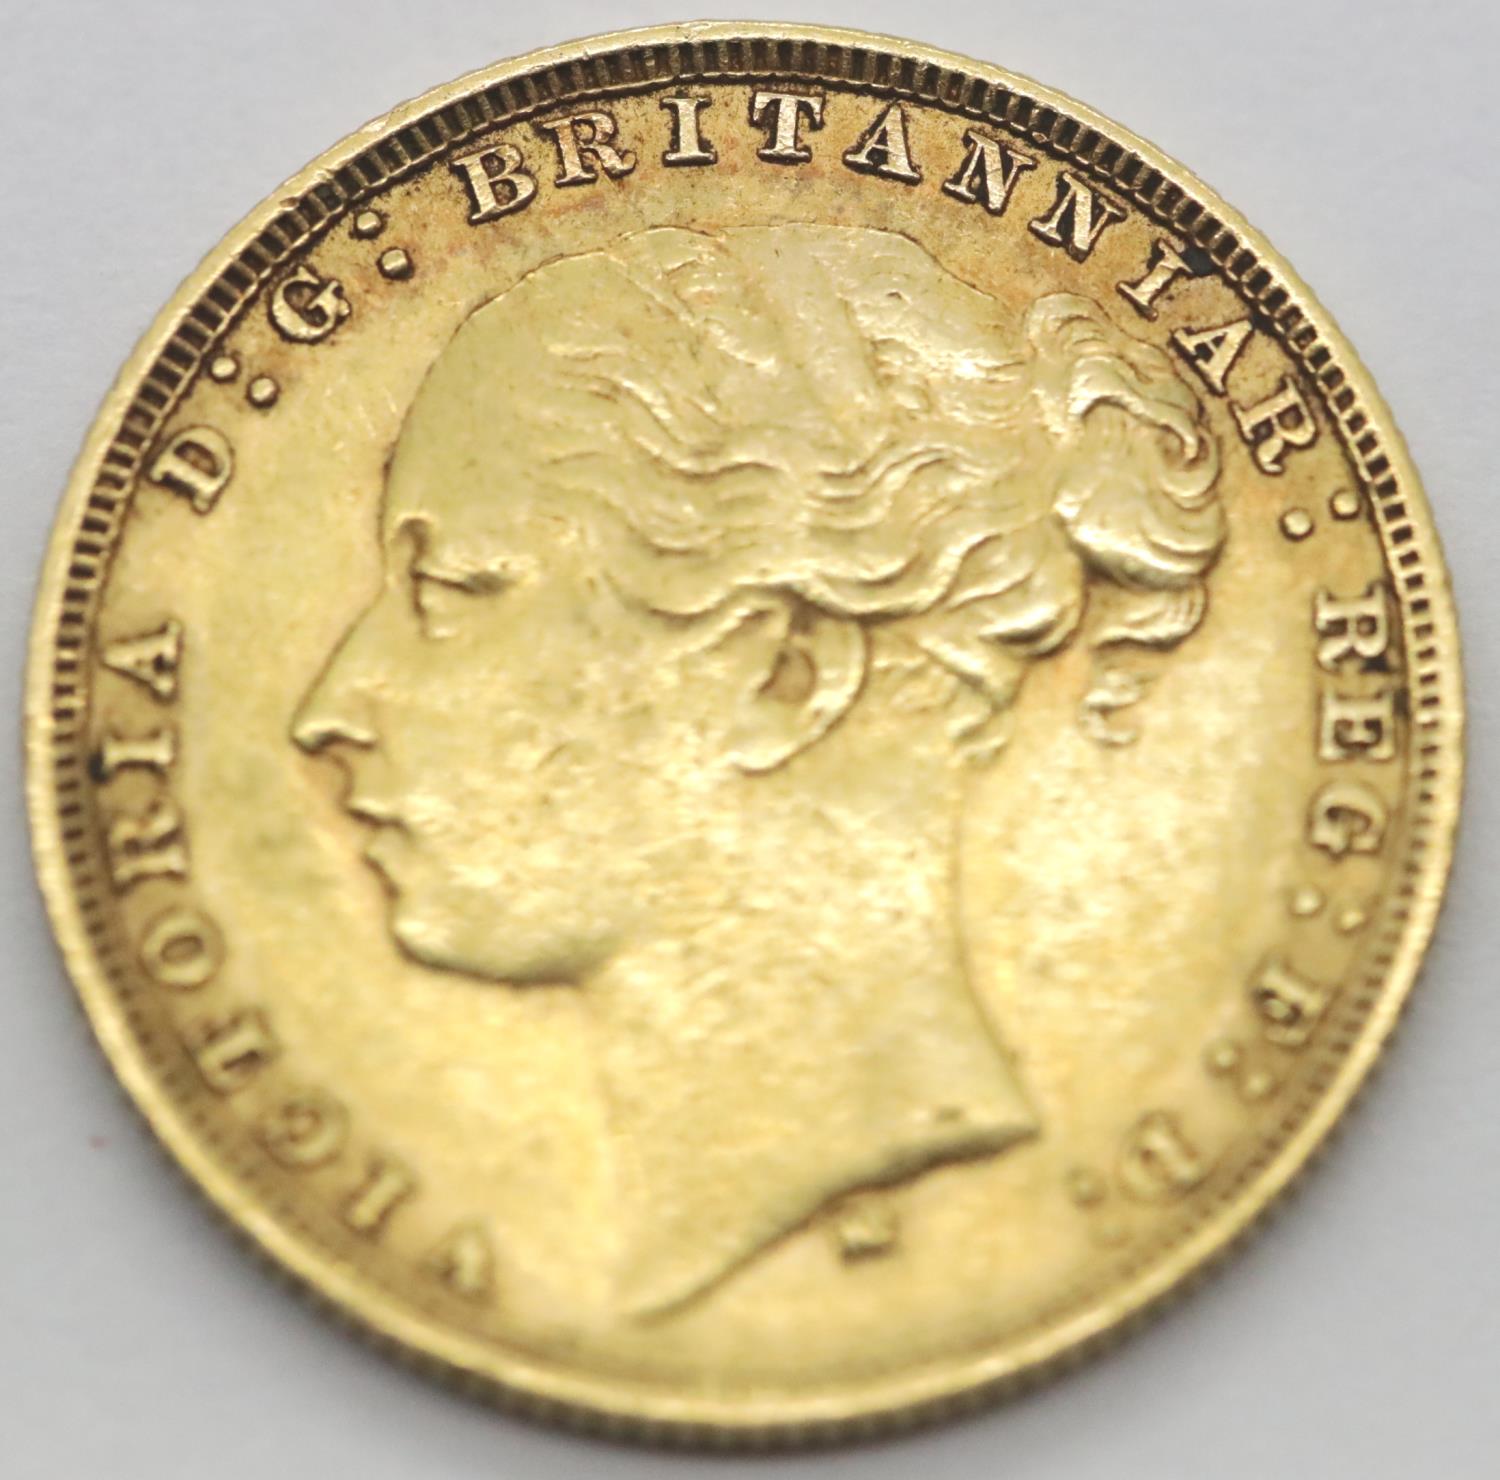 Victoria 1880 full sovereign, Melbourne Mint. P&P Group 1 (£14+VAT for the first lot and £1+VAT